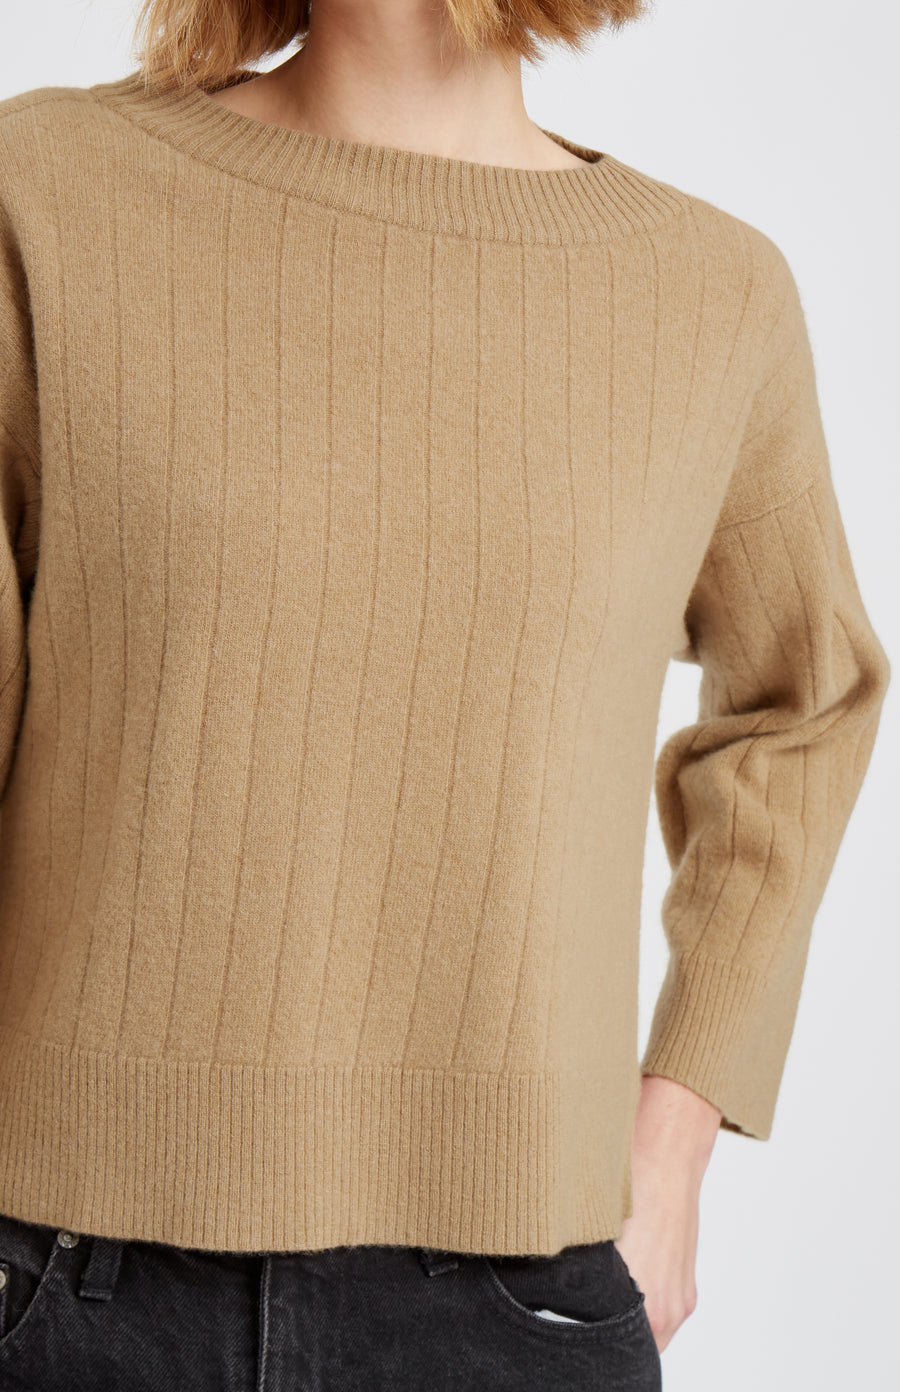 Pringle of Scotland Wool Cashmere Blend Wide Neck Rib Jumper In Sand showing neck detail